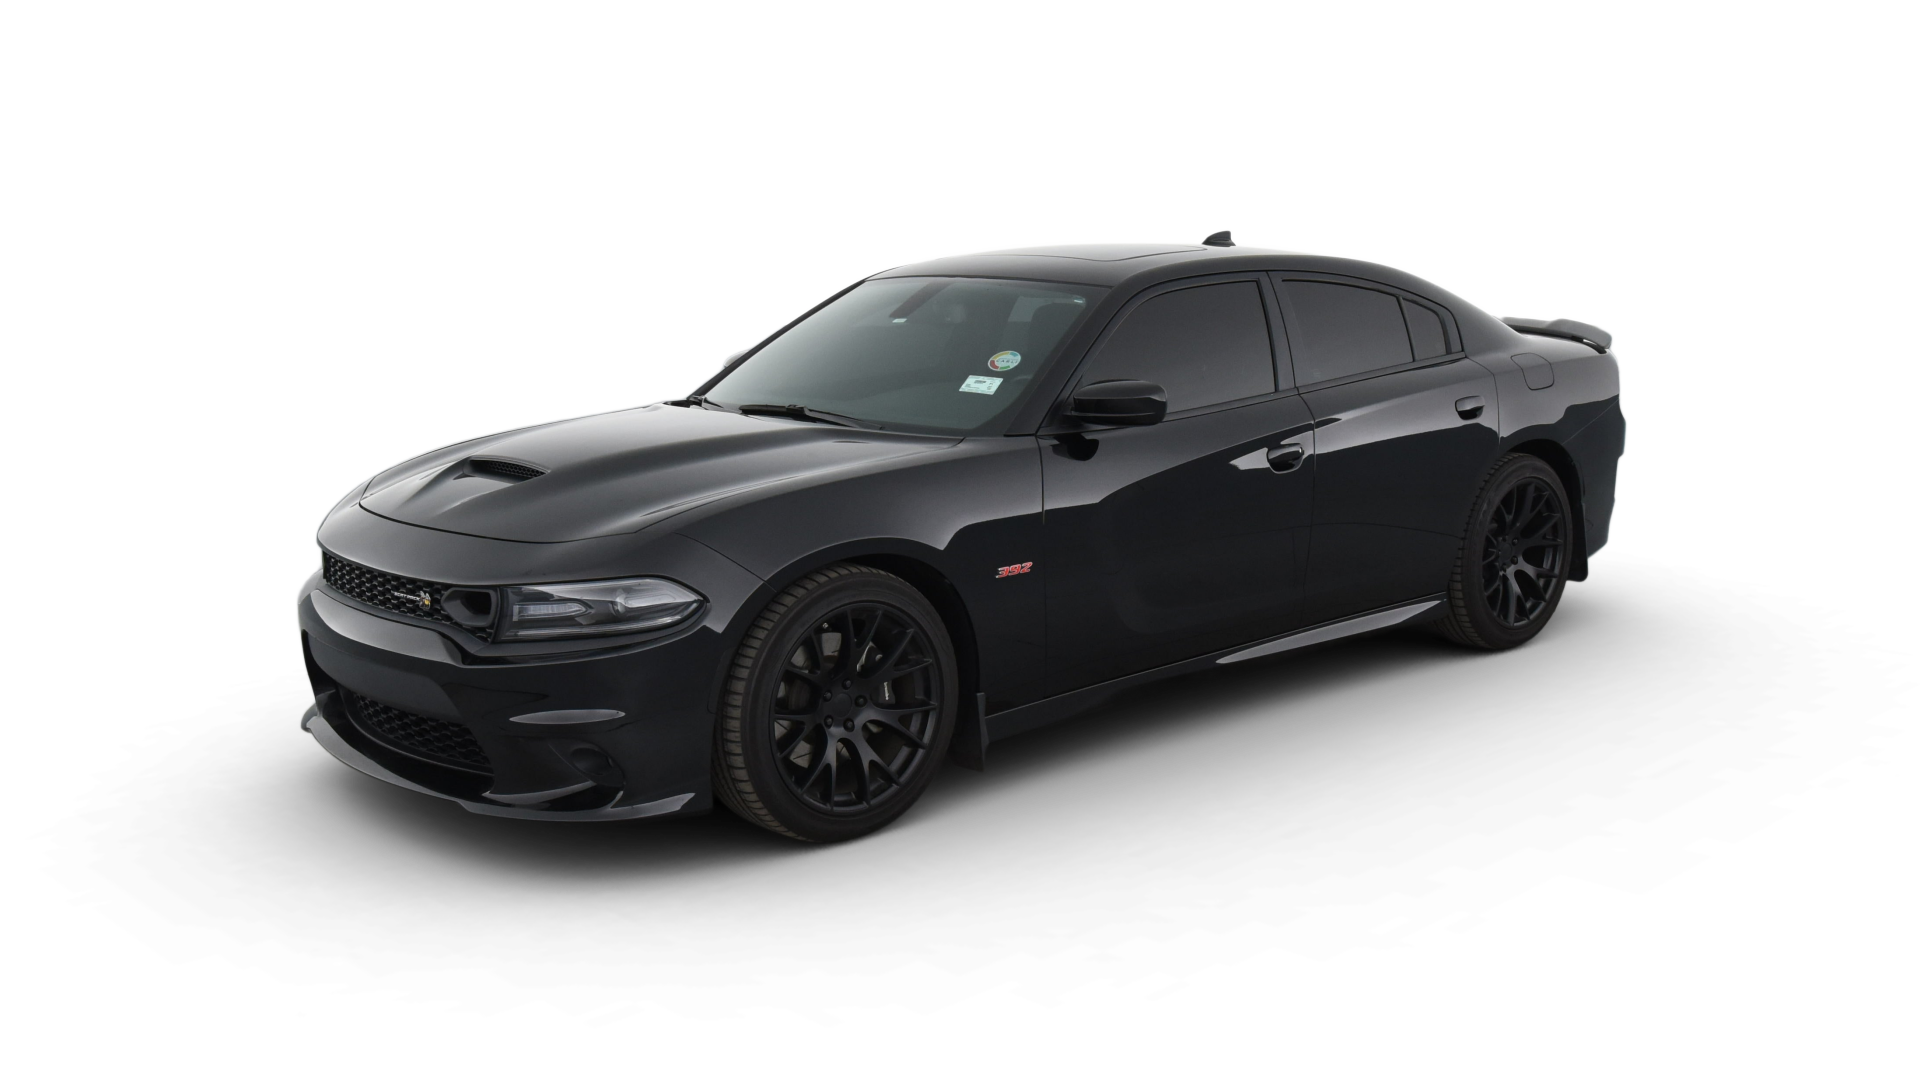 Used Dodge Charger Scat Pack For Sale Online | Carvana